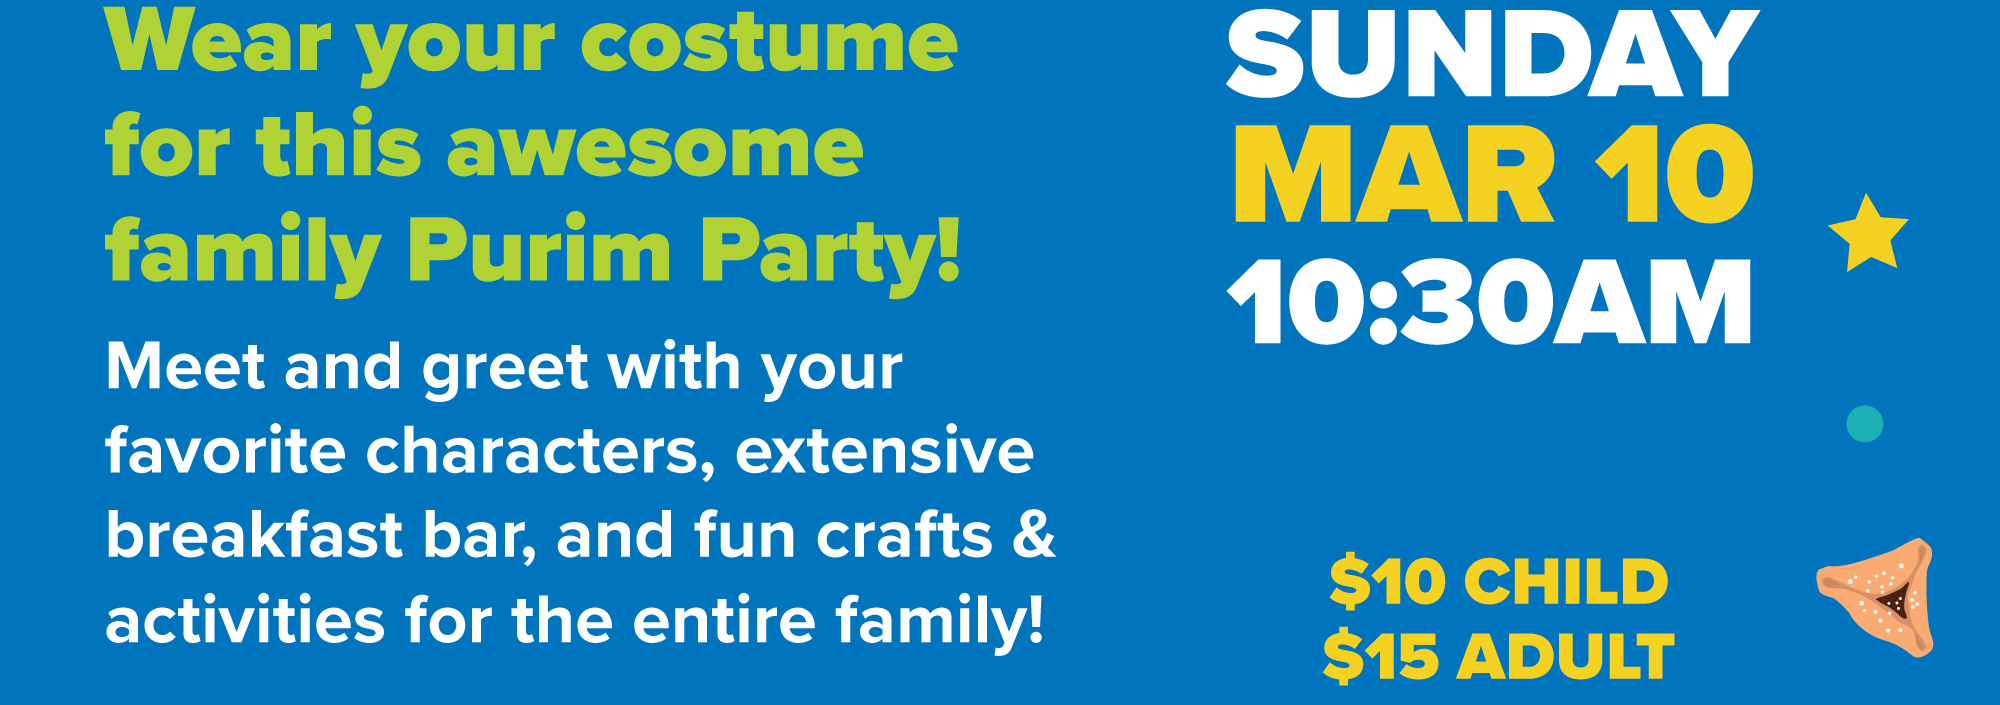 Sunday March 10th at 10:30AM | $10 PER CHILD | $15 PER ADULT | Come in your favorite costume and join us for this awesome family Purim event! | Enjoy meet and greets with your favorite characters, an extensive breakfast bar, shalach manot basket making, hamantaschen, huge bounce houses, crafts and more! The whole family will love this exciting character breakfast!